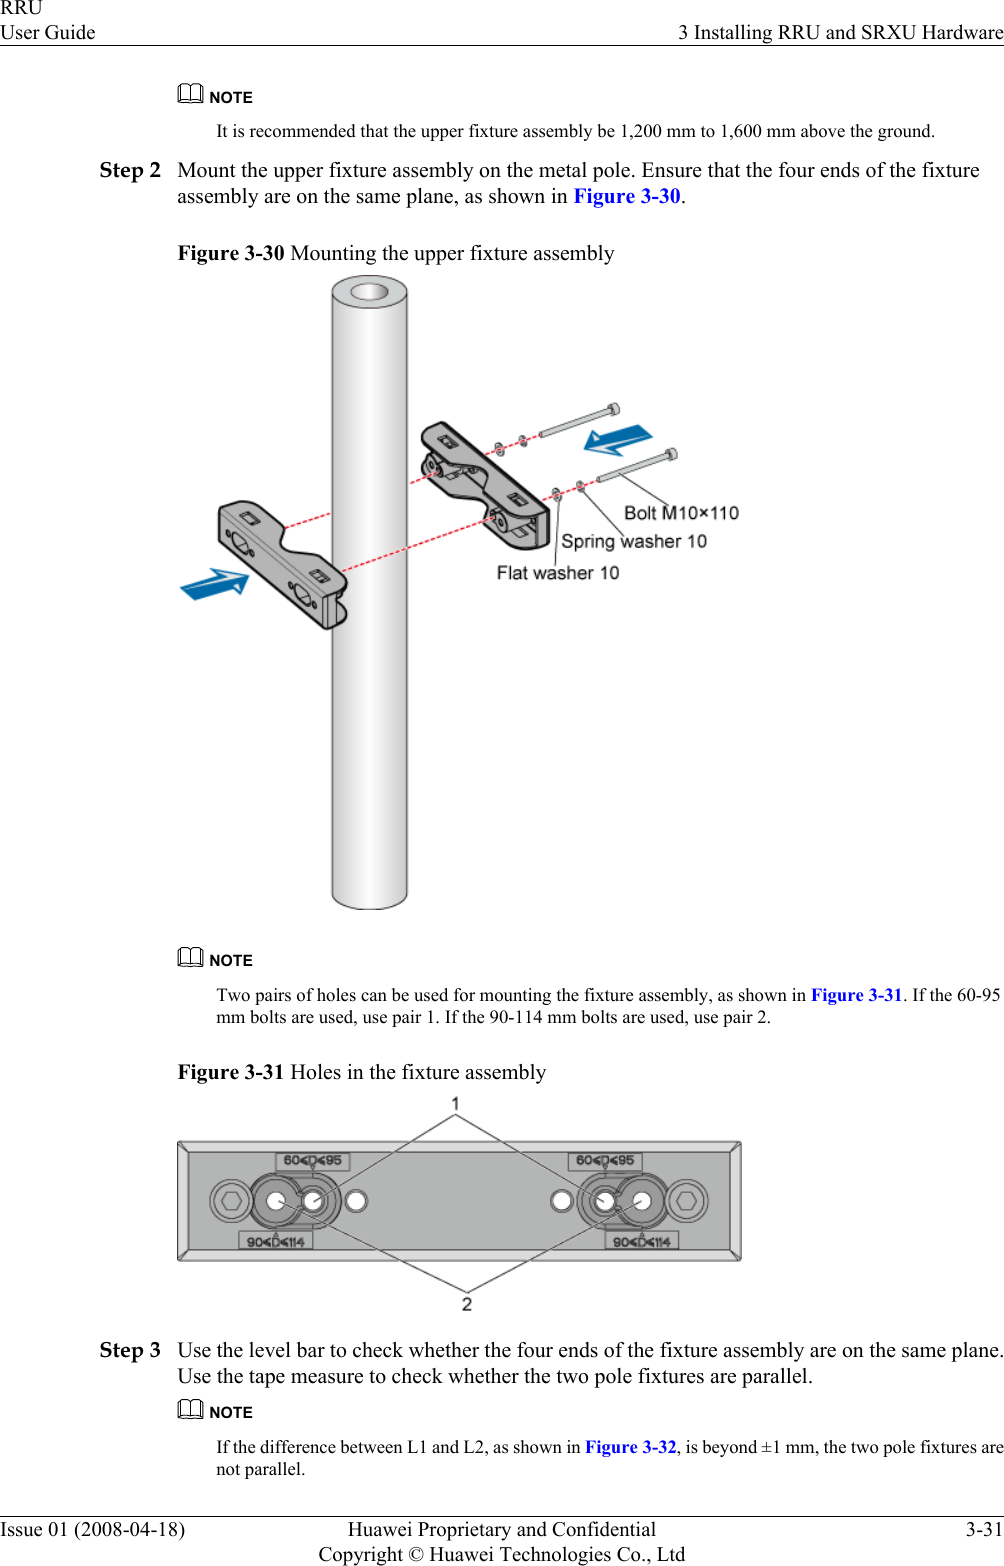 NOTEIt is recommended that the upper fixture assembly be 1,200 mm to 1,600 mm above the ground.Step 2 Mount the upper fixture assembly on the metal pole. Ensure that the four ends of the fixtureassembly are on the same plane, as shown in Figure 3-30.Figure 3-30 Mounting the upper fixture assemblyNOTETwo pairs of holes can be used for mounting the fixture assembly, as shown in Figure 3-31. If the 60-95mm bolts are used, use pair 1. If the 90-114 mm bolts are used, use pair 2.Figure 3-31 Holes in the fixture assemblyStep 3 Use the level bar to check whether the four ends of the fixture assembly are on the same plane.Use the tape measure to check whether the two pole fixtures are parallel.NOTEIf the difference between L1 and L2, as shown in Figure 3-32, is beyond ±1 mm, the two pole fixtures arenot parallel.RRUUser Guide 3 Installing RRU and SRXU HardwareIssue 01 (2008-04-18) Huawei Proprietary and ConfidentialCopyright © Huawei Technologies Co., Ltd3-31